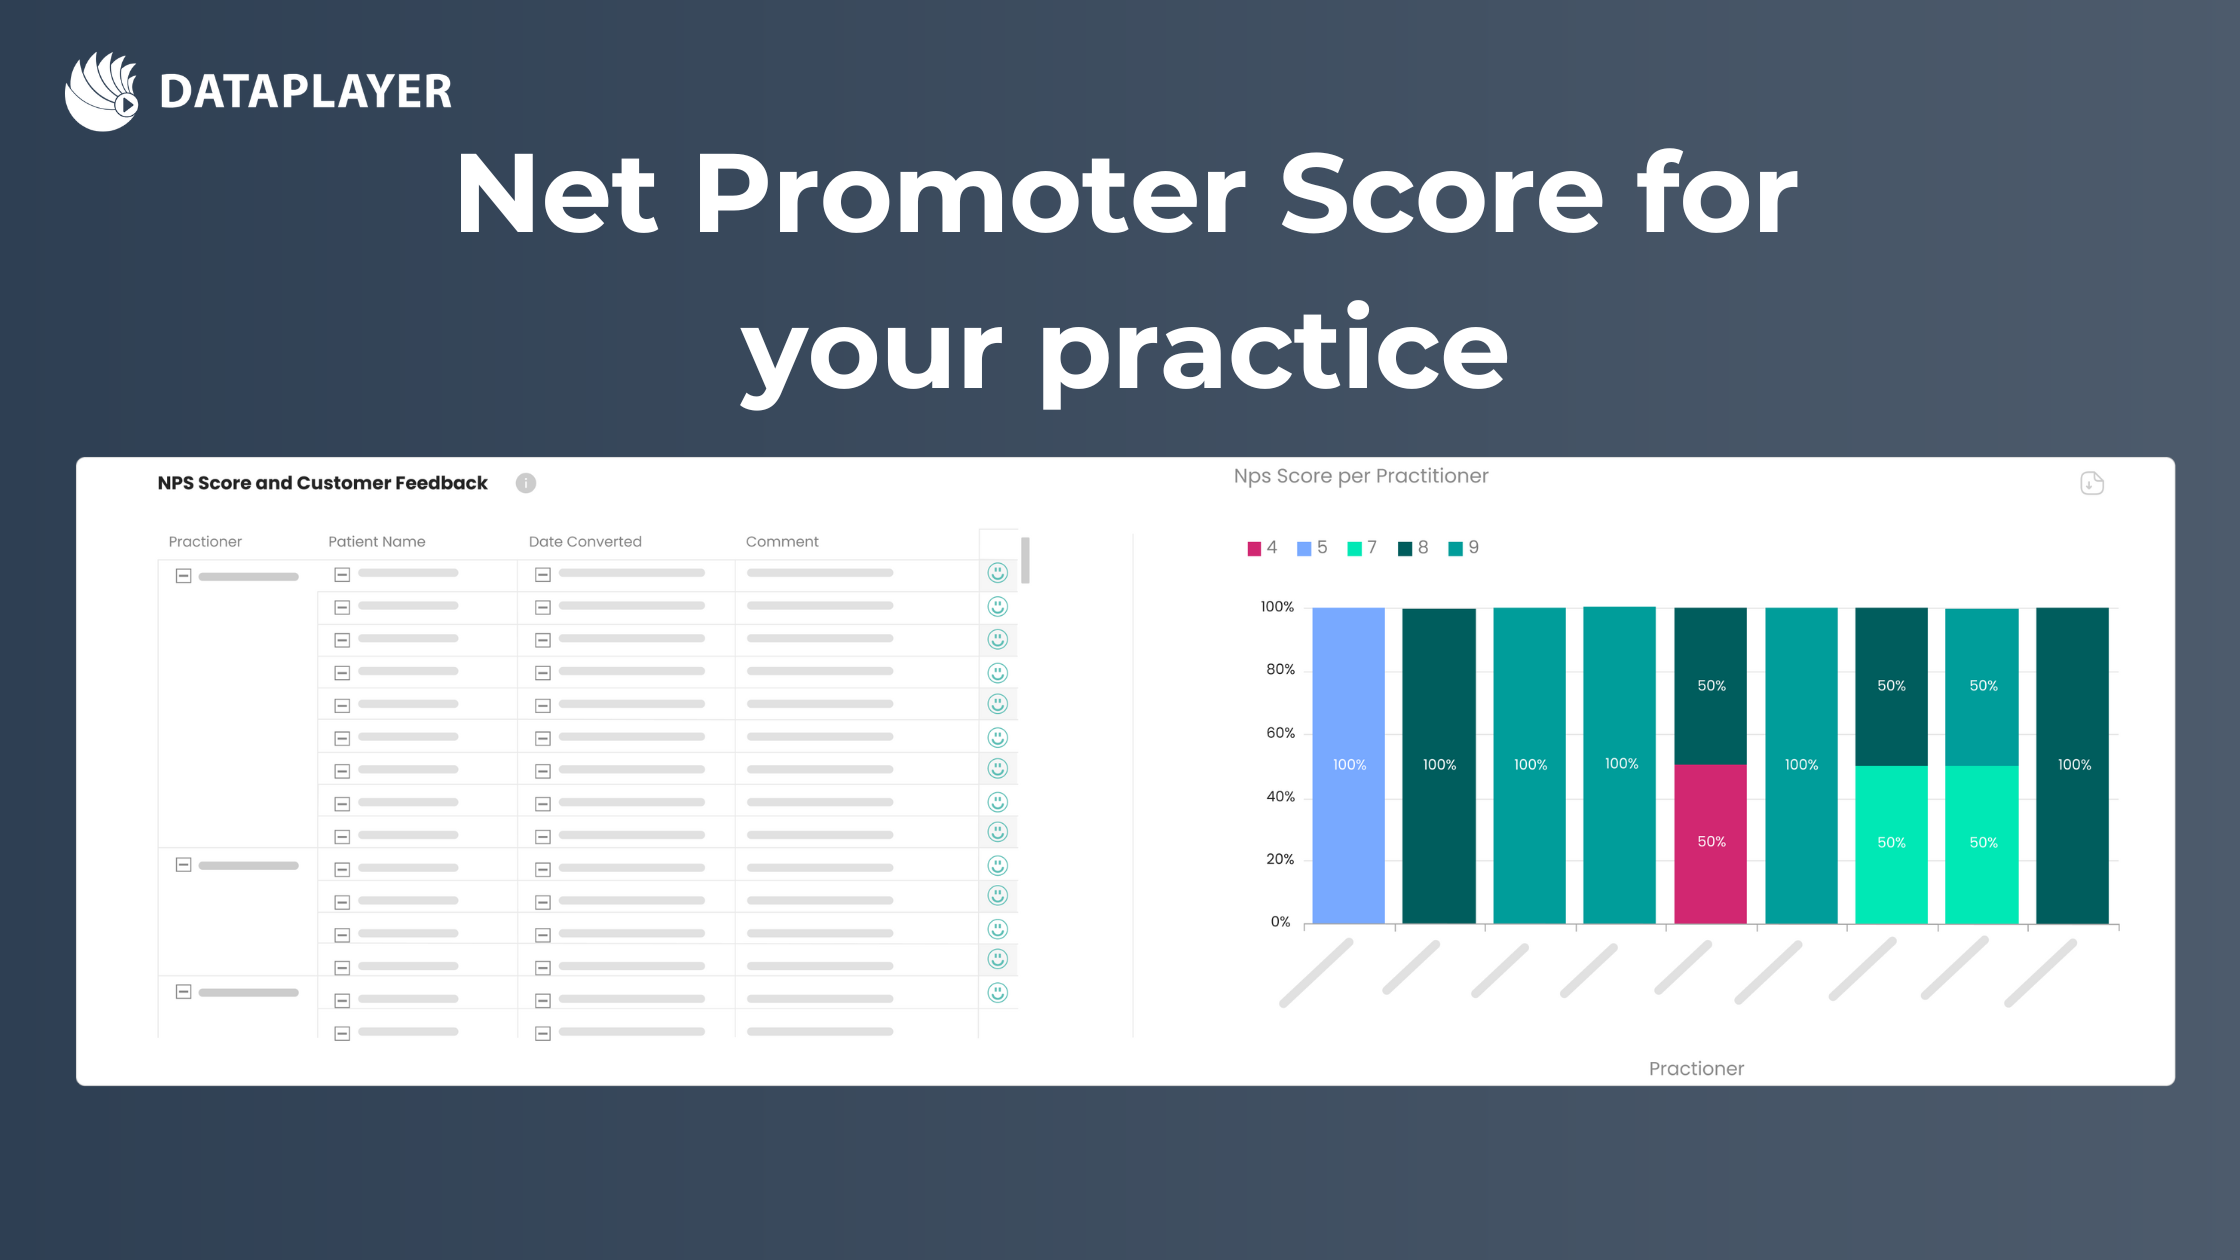 Measure Net Promoter Score for your practice